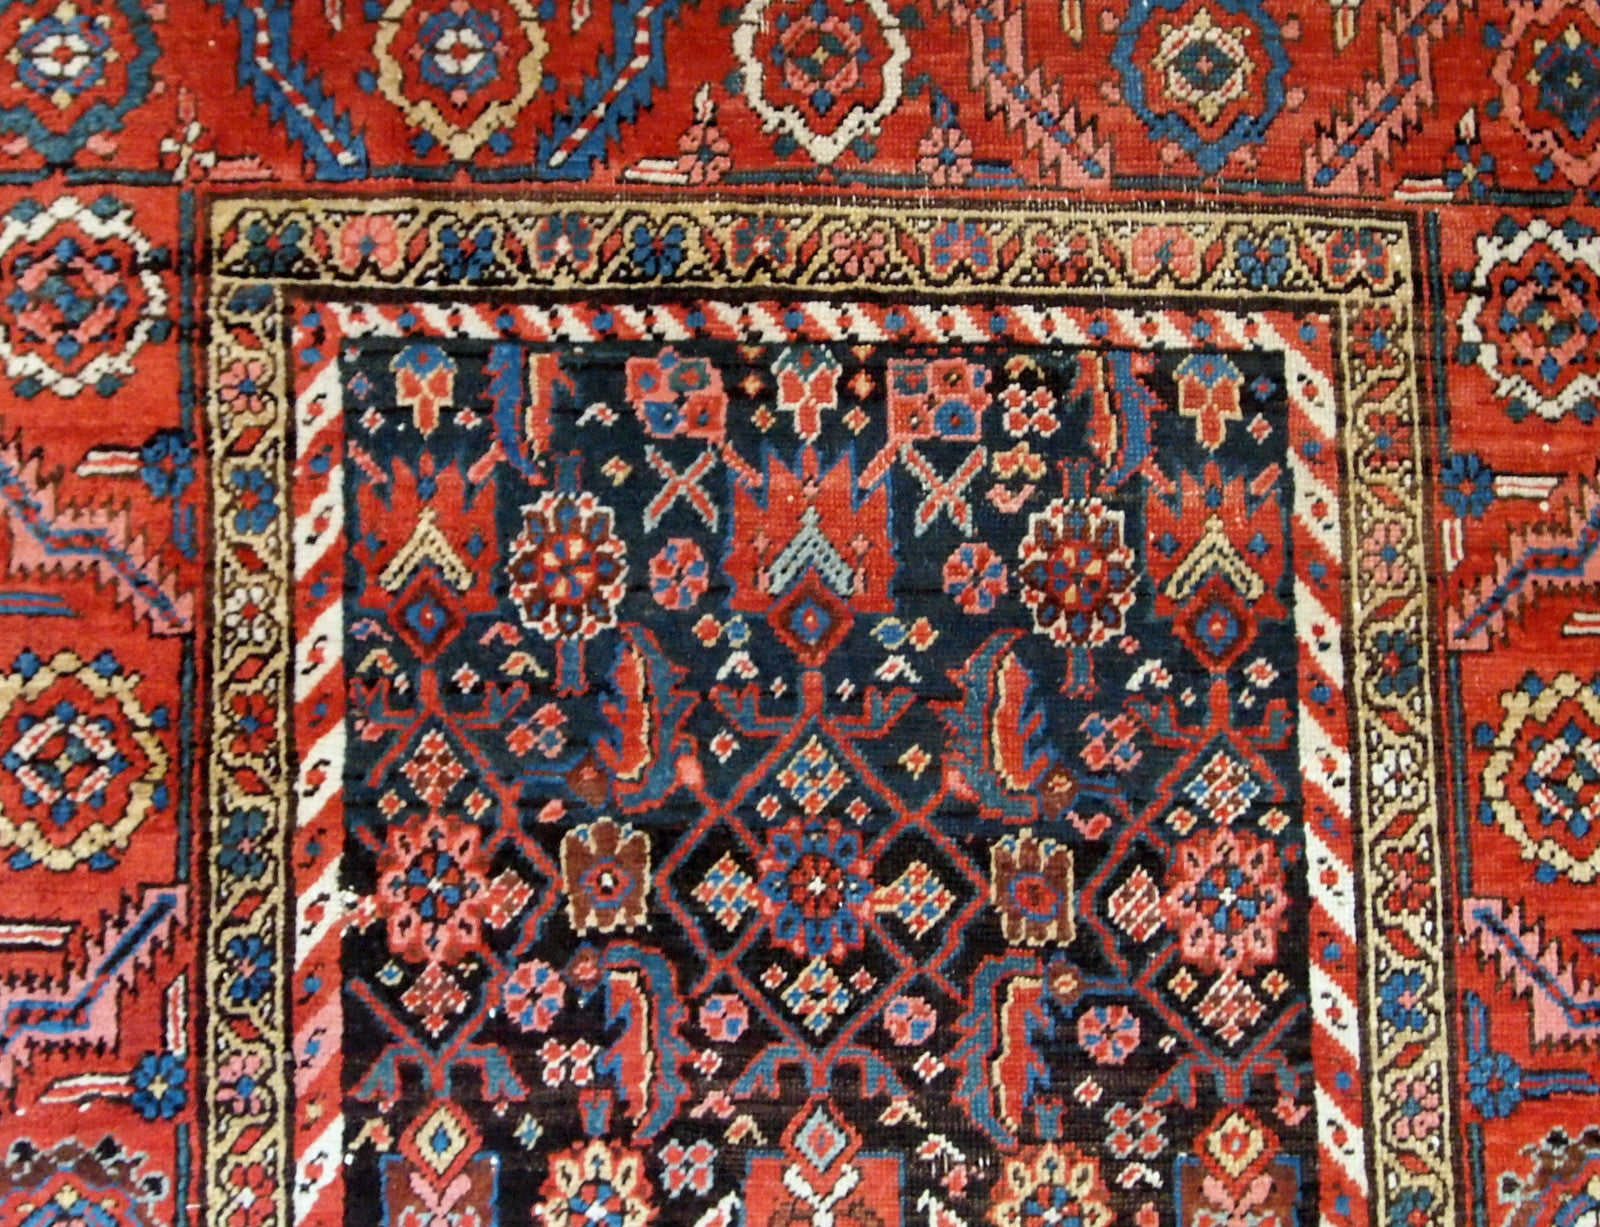 Handmade antique Bakhsaish runner in chocolate brown, red and blue shades. It is from the end of 19th century in good condition.